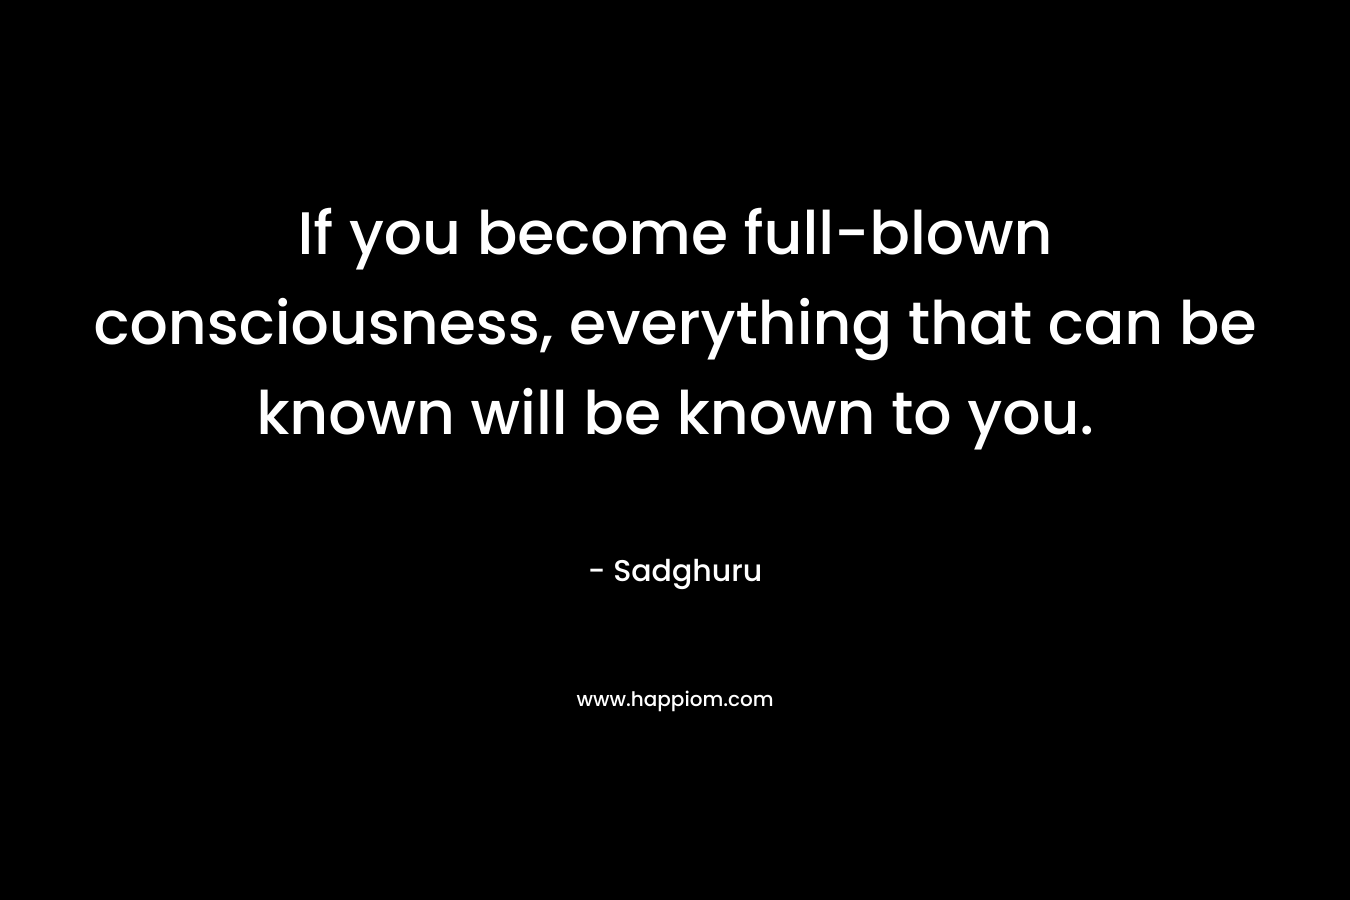 If you become full-blown consciousness, everything that can be known will be known to you.